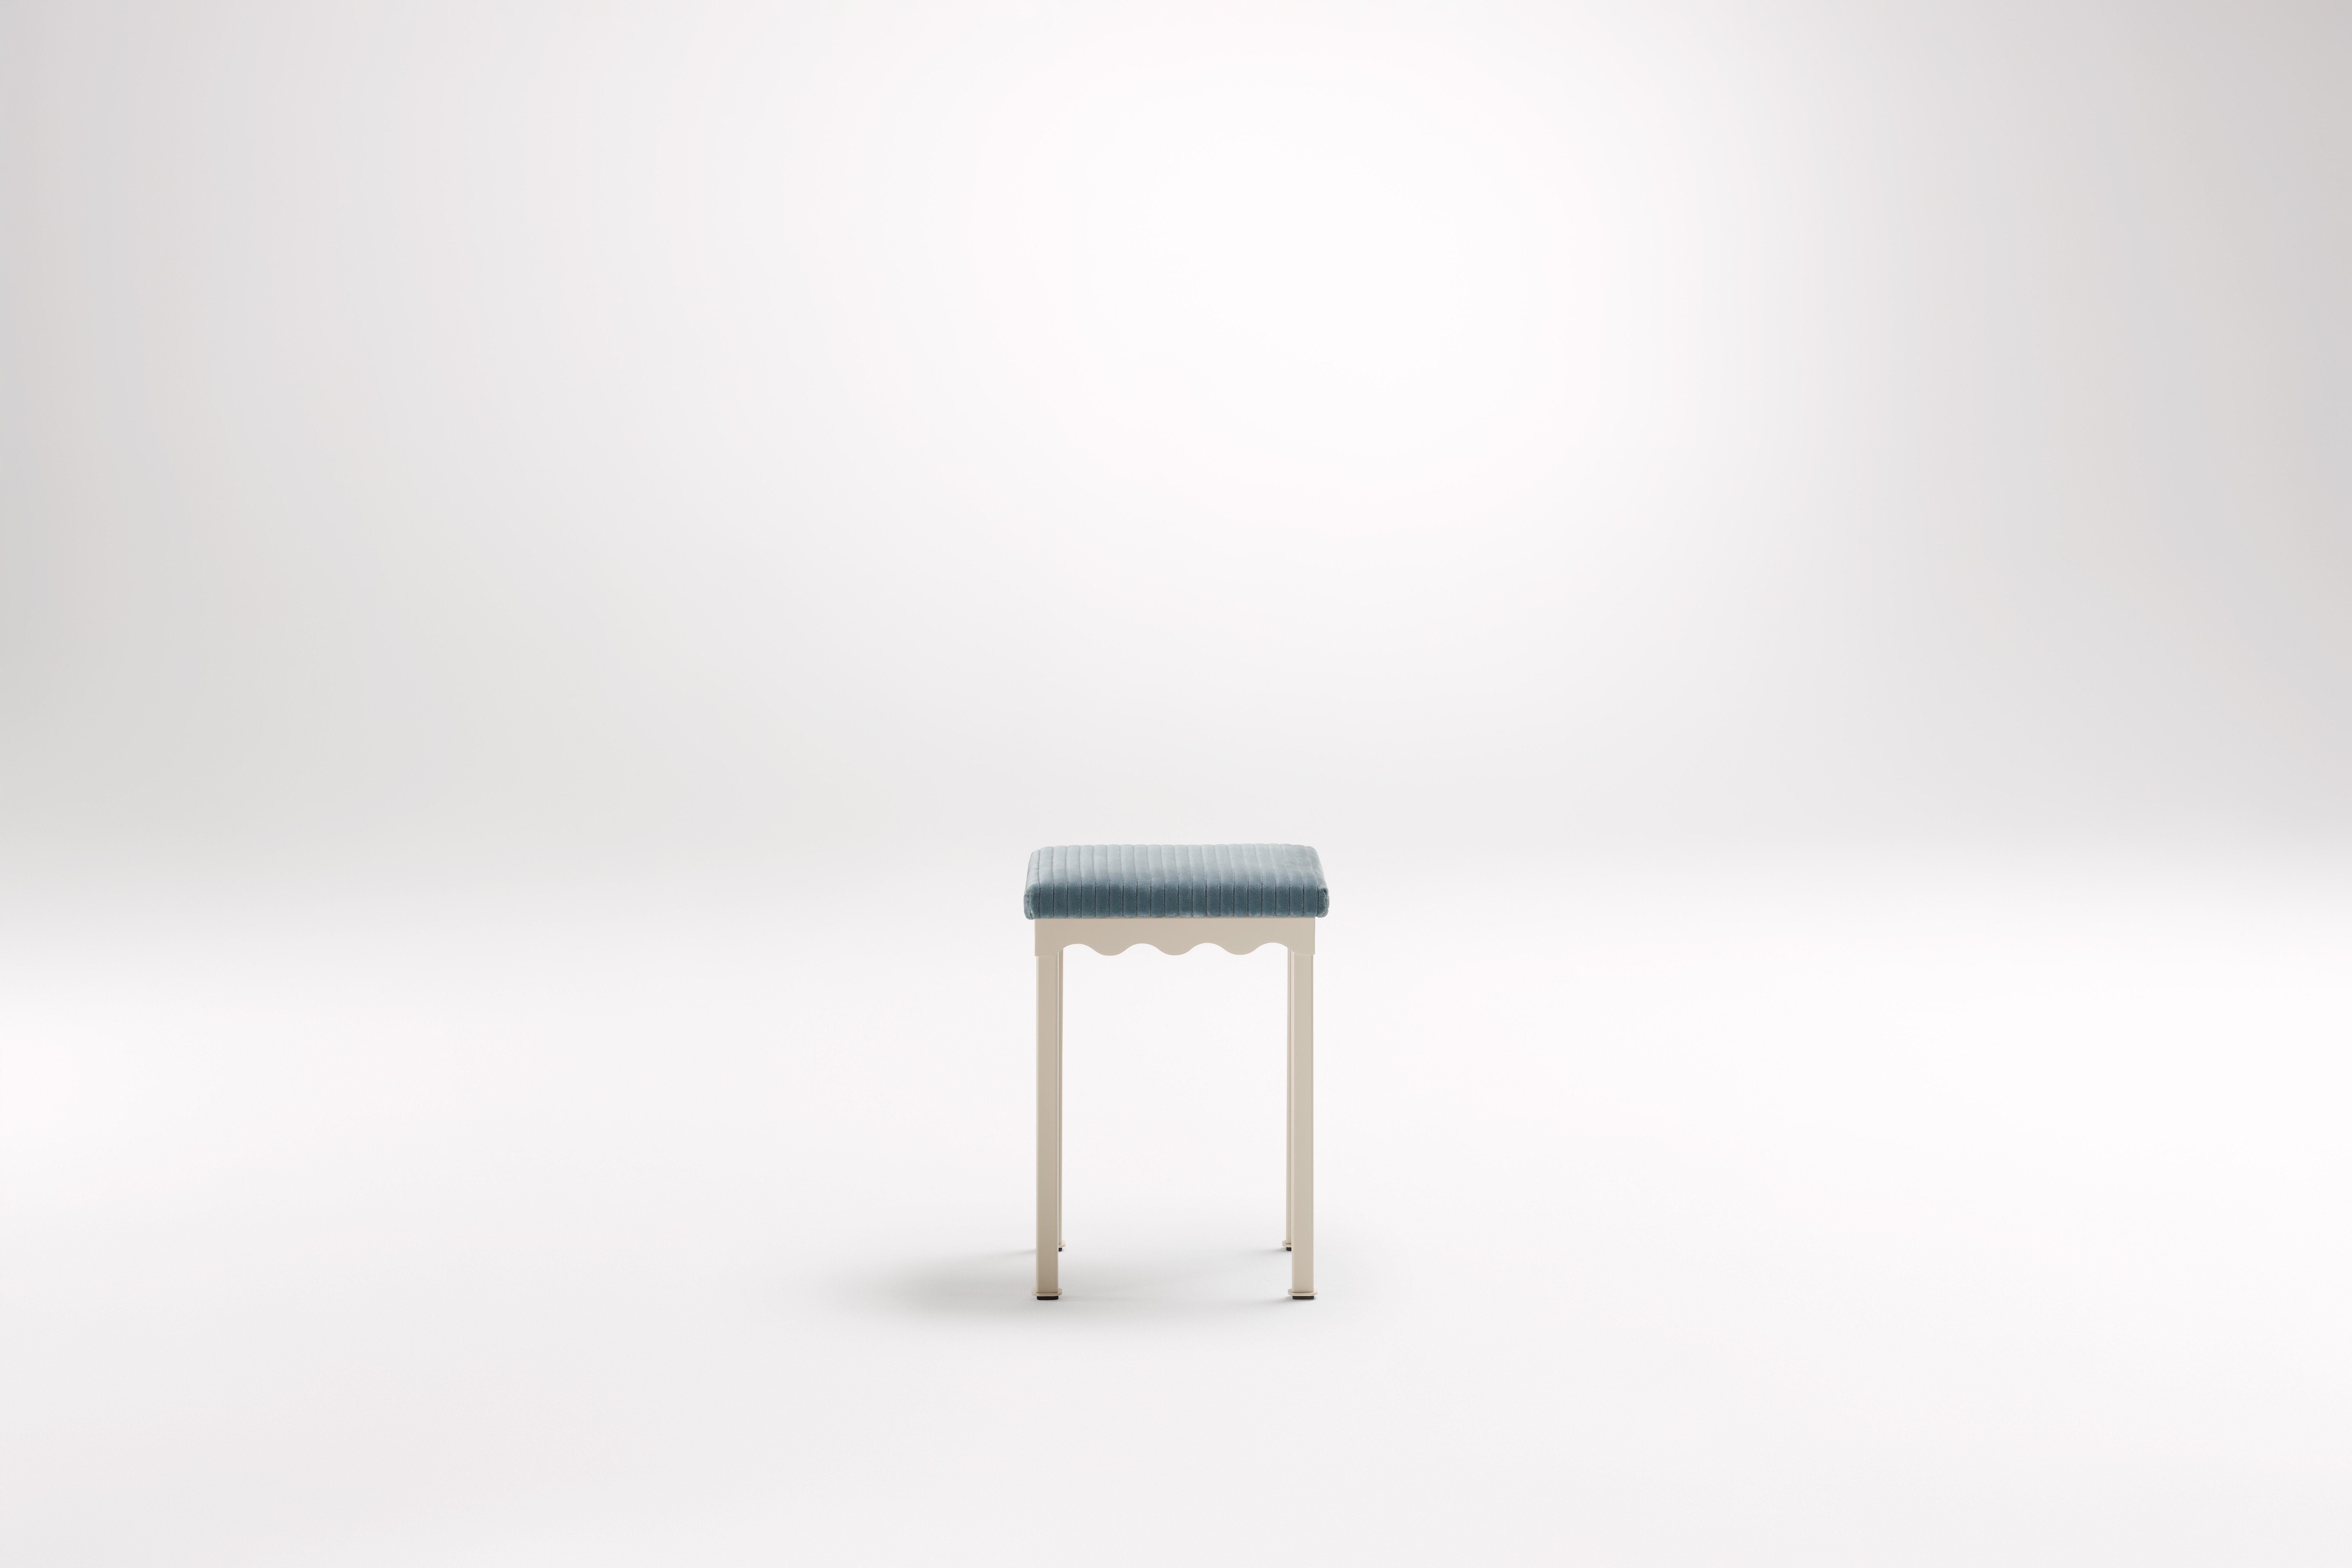 Oracle Bellini Low Stool by Coco Flip
Dimensions: D 34 x W 34 x H 45 cm
Materials: Timber / Stone tops, Powder-coated steel frame. 
Weight: 5 kg
Frame Finishes: Textura Paperbark.

Coco Flip is a Melbourne based furniture and lighting design studio,